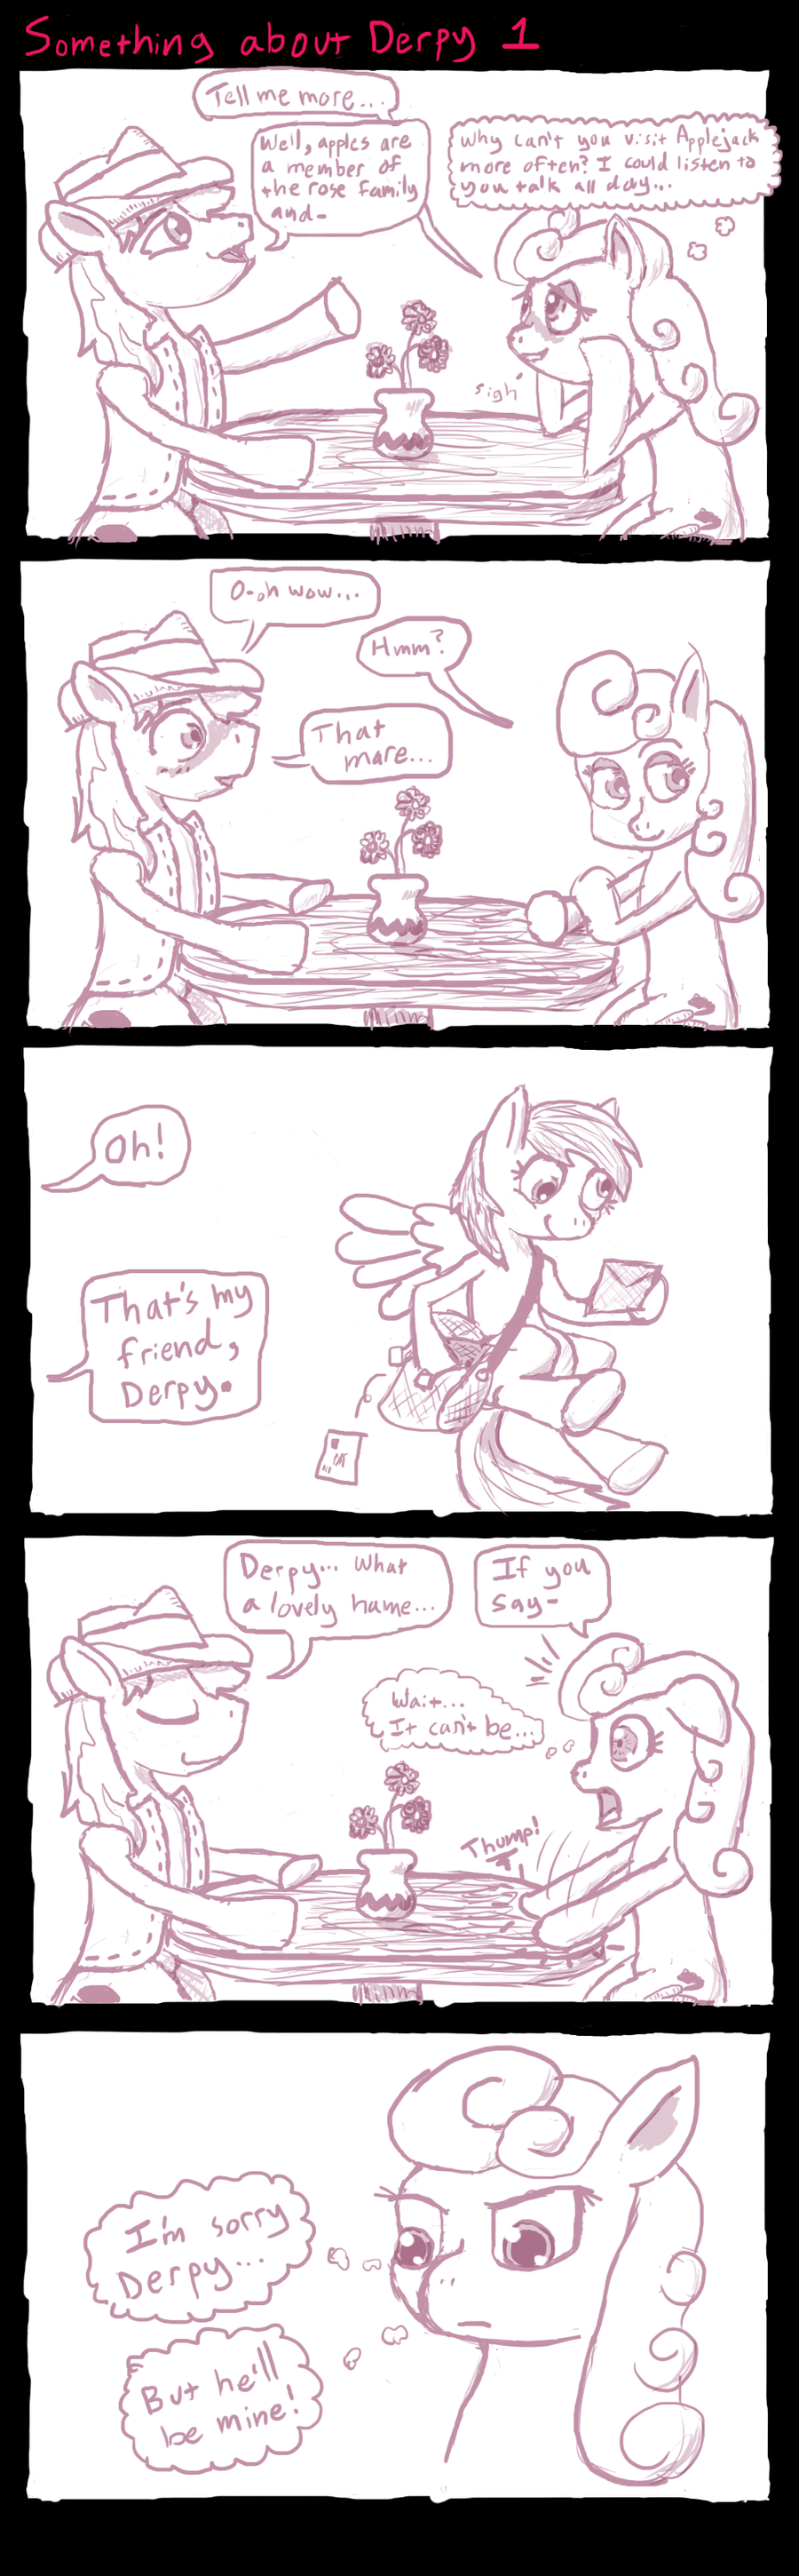 something_about_derpy_1_by_ficficponyfic-d4crdmb.png